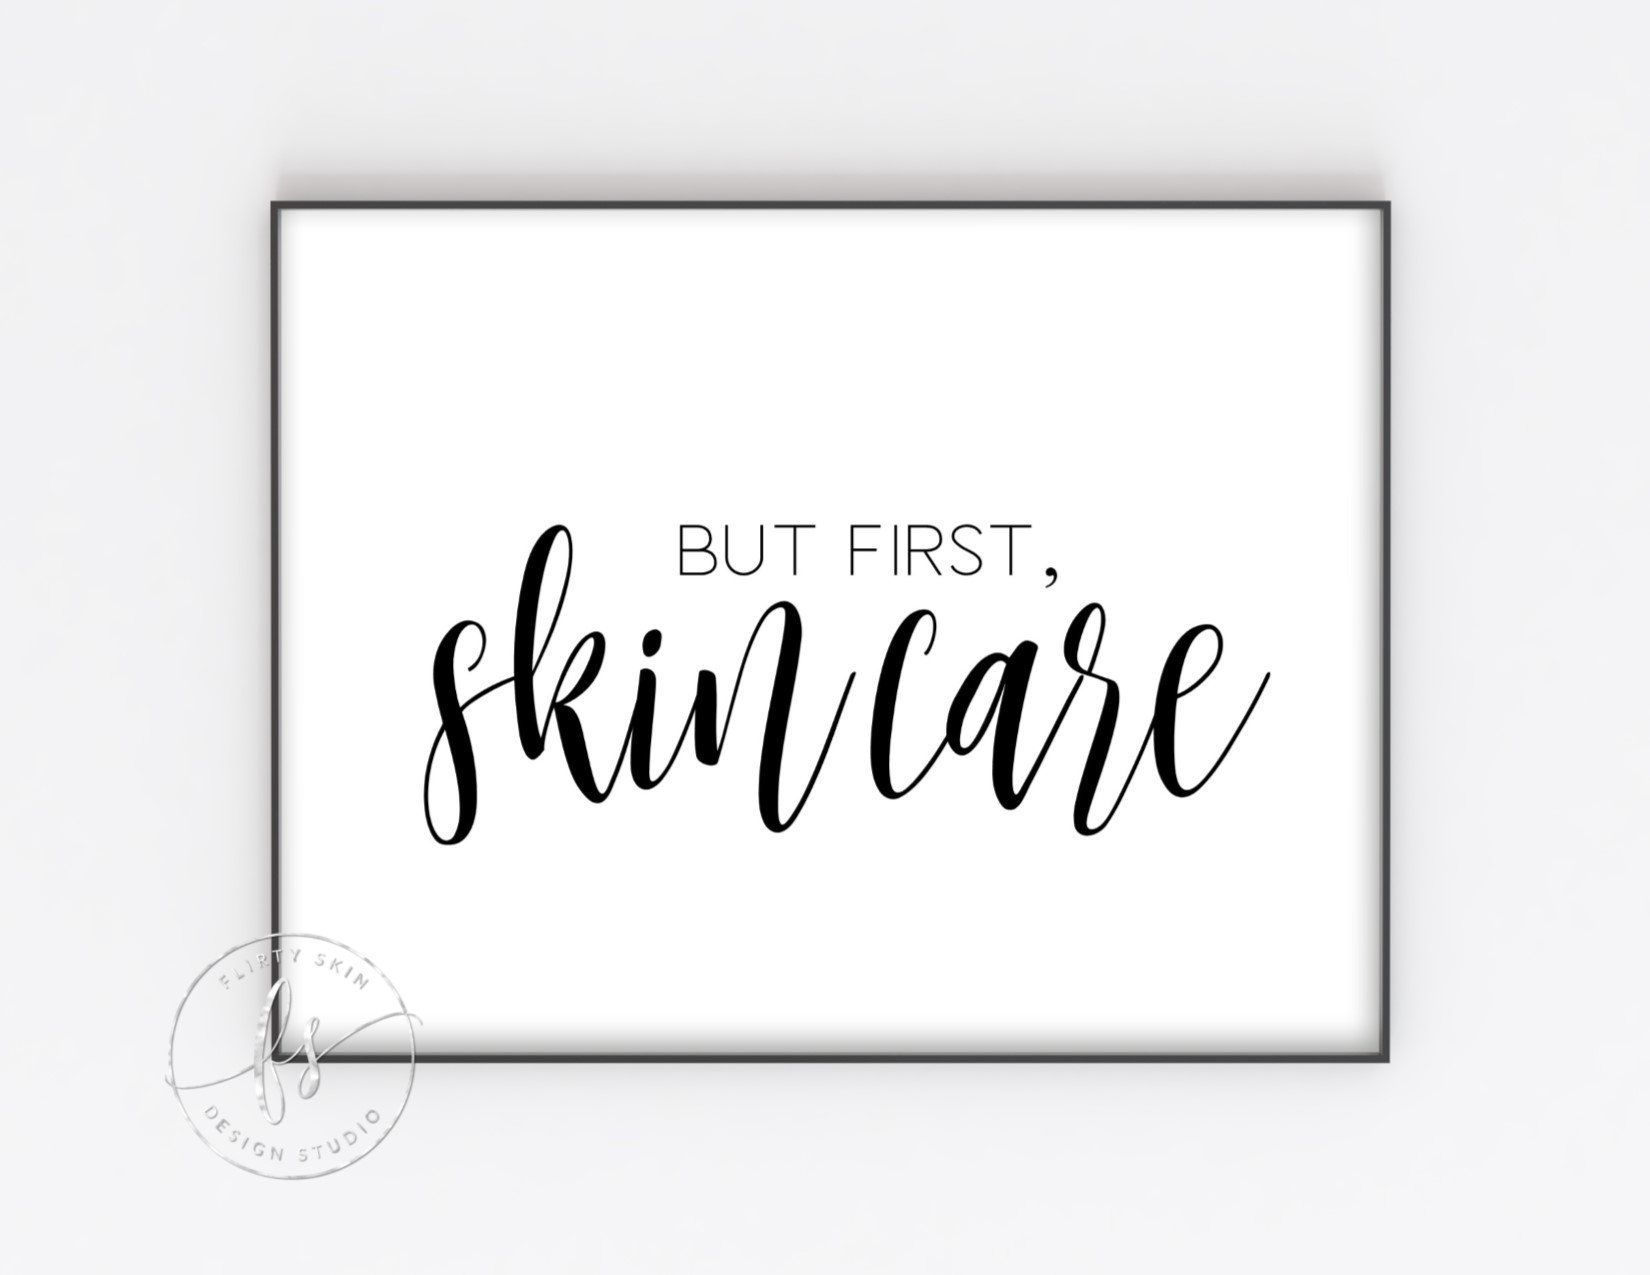 But First Skin Care | Esthetician Decor | Spa Quote | Skin Care | Aesthetician | Spa | Salon | Beauty Quote | Spa Decor | Skin Specialist - But First Skin Care | Esthetician Decor | Spa Quote | Skin Care | Aesthetician | Spa | Salon | Beauty Quote | Spa Decor | Skin Specialist -   18 beauty Spa pictures ideas